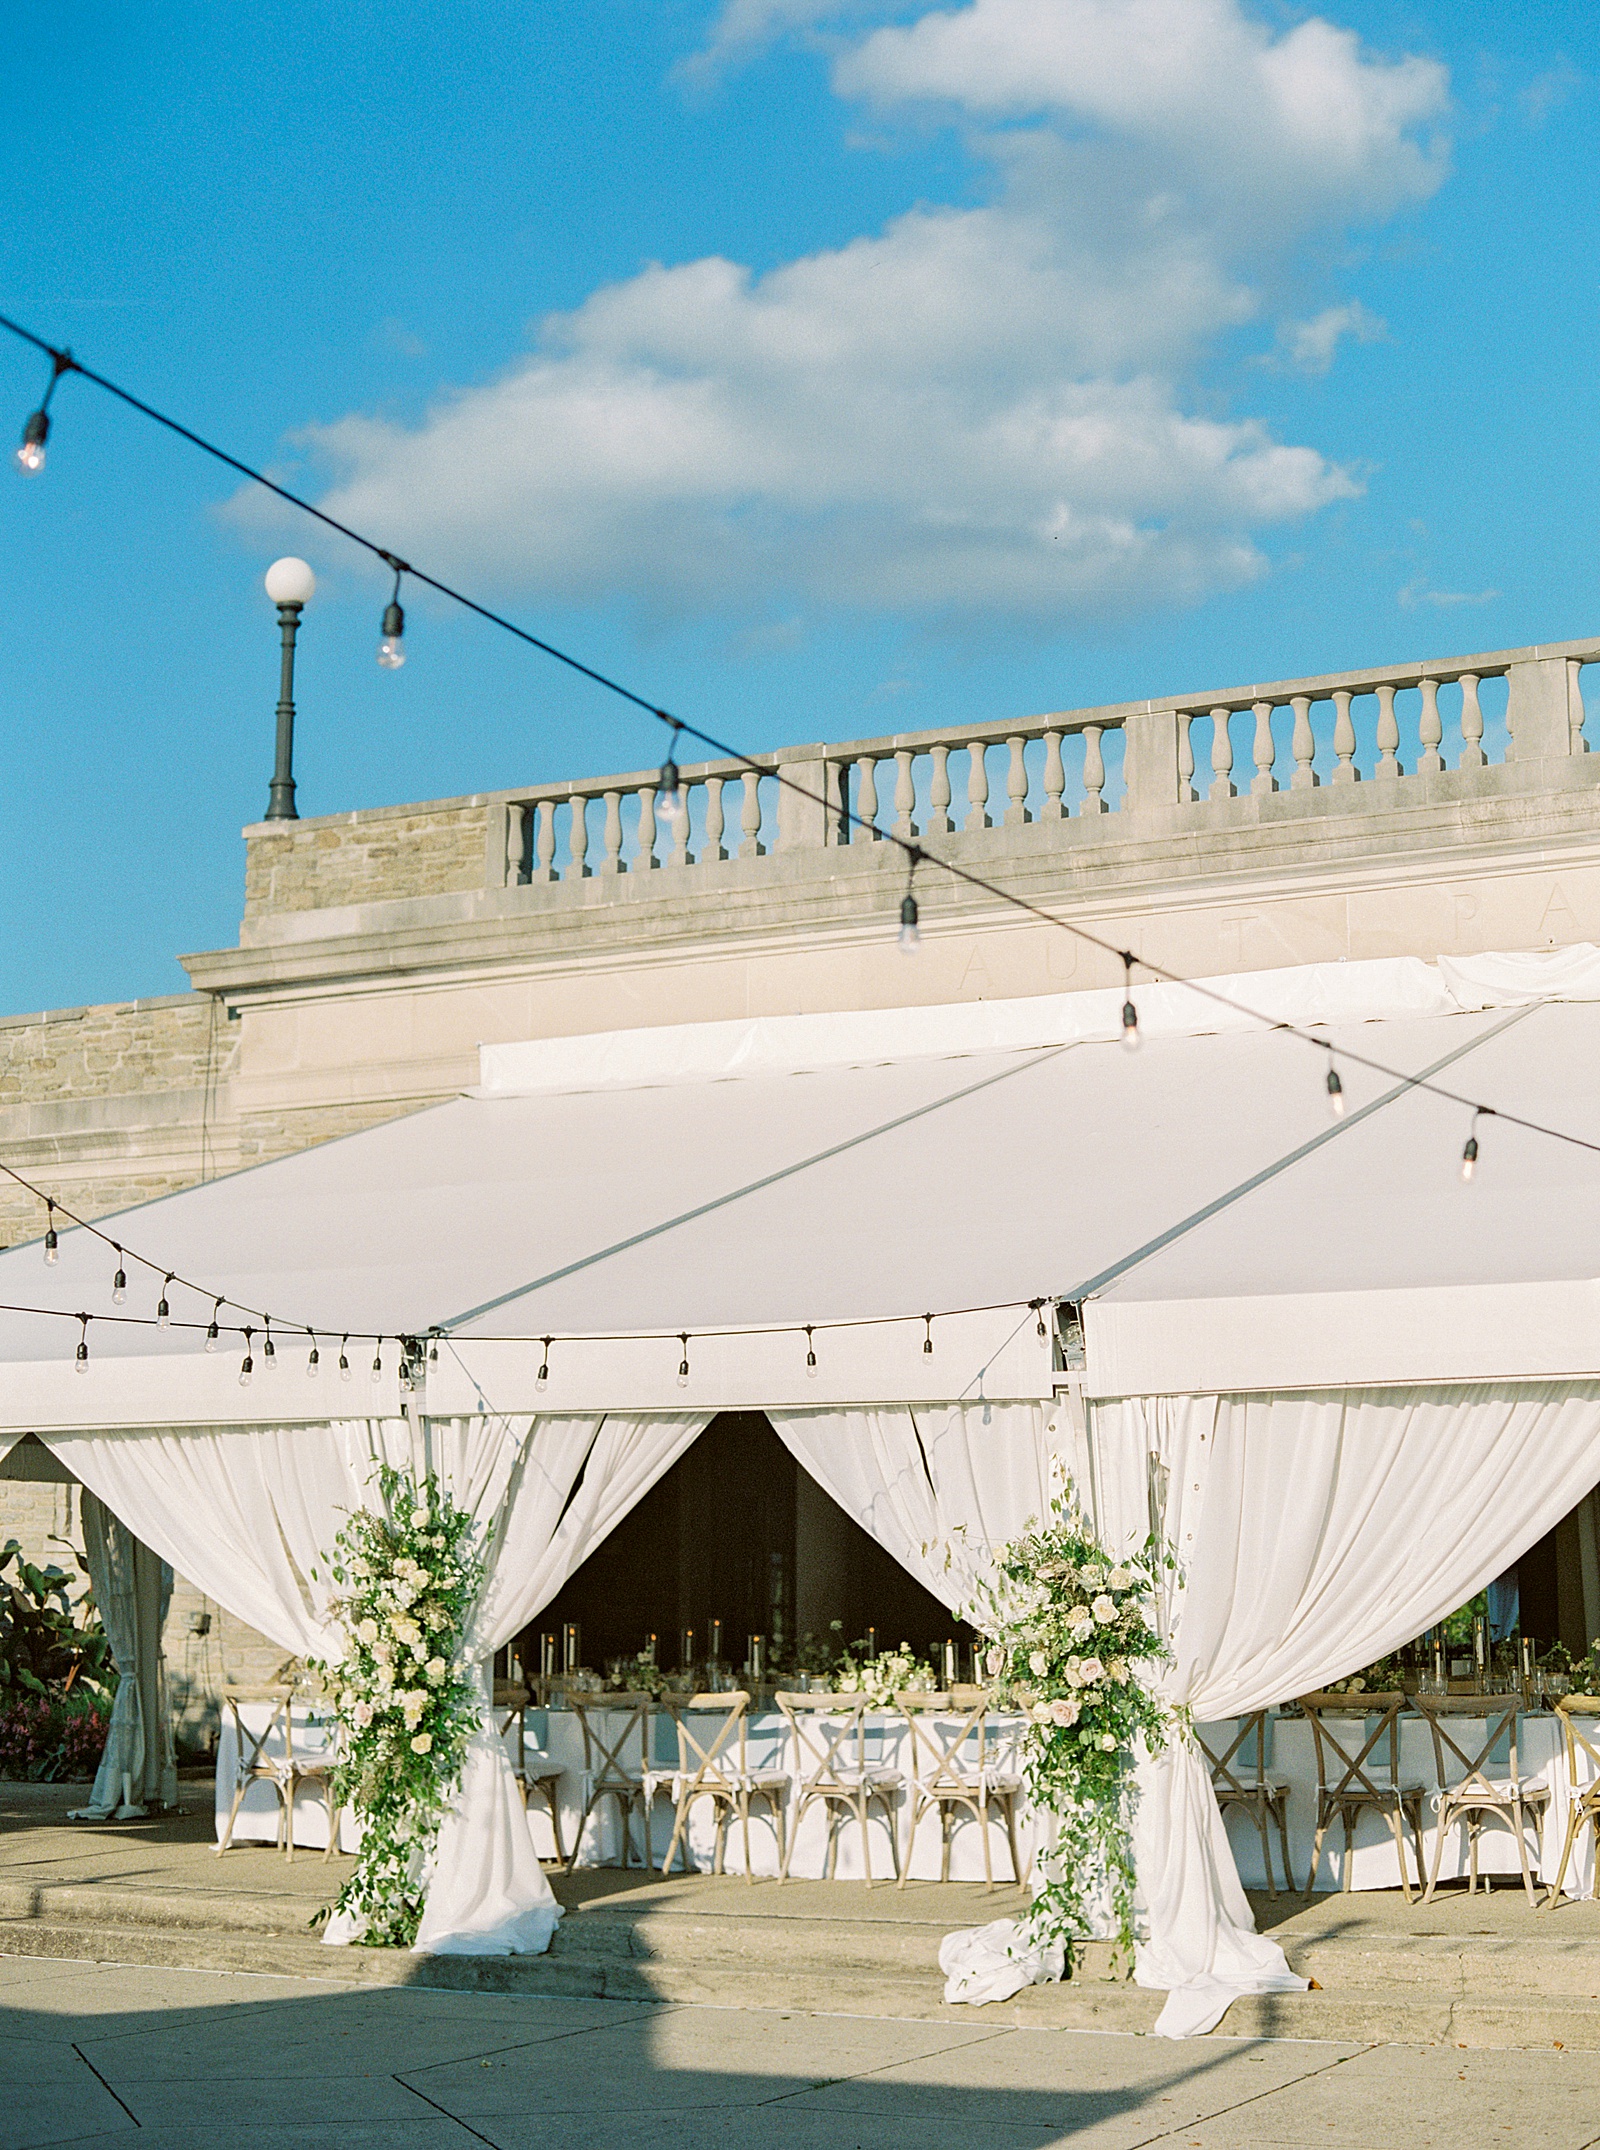 Wedding Reception with tented pavilion at ault park